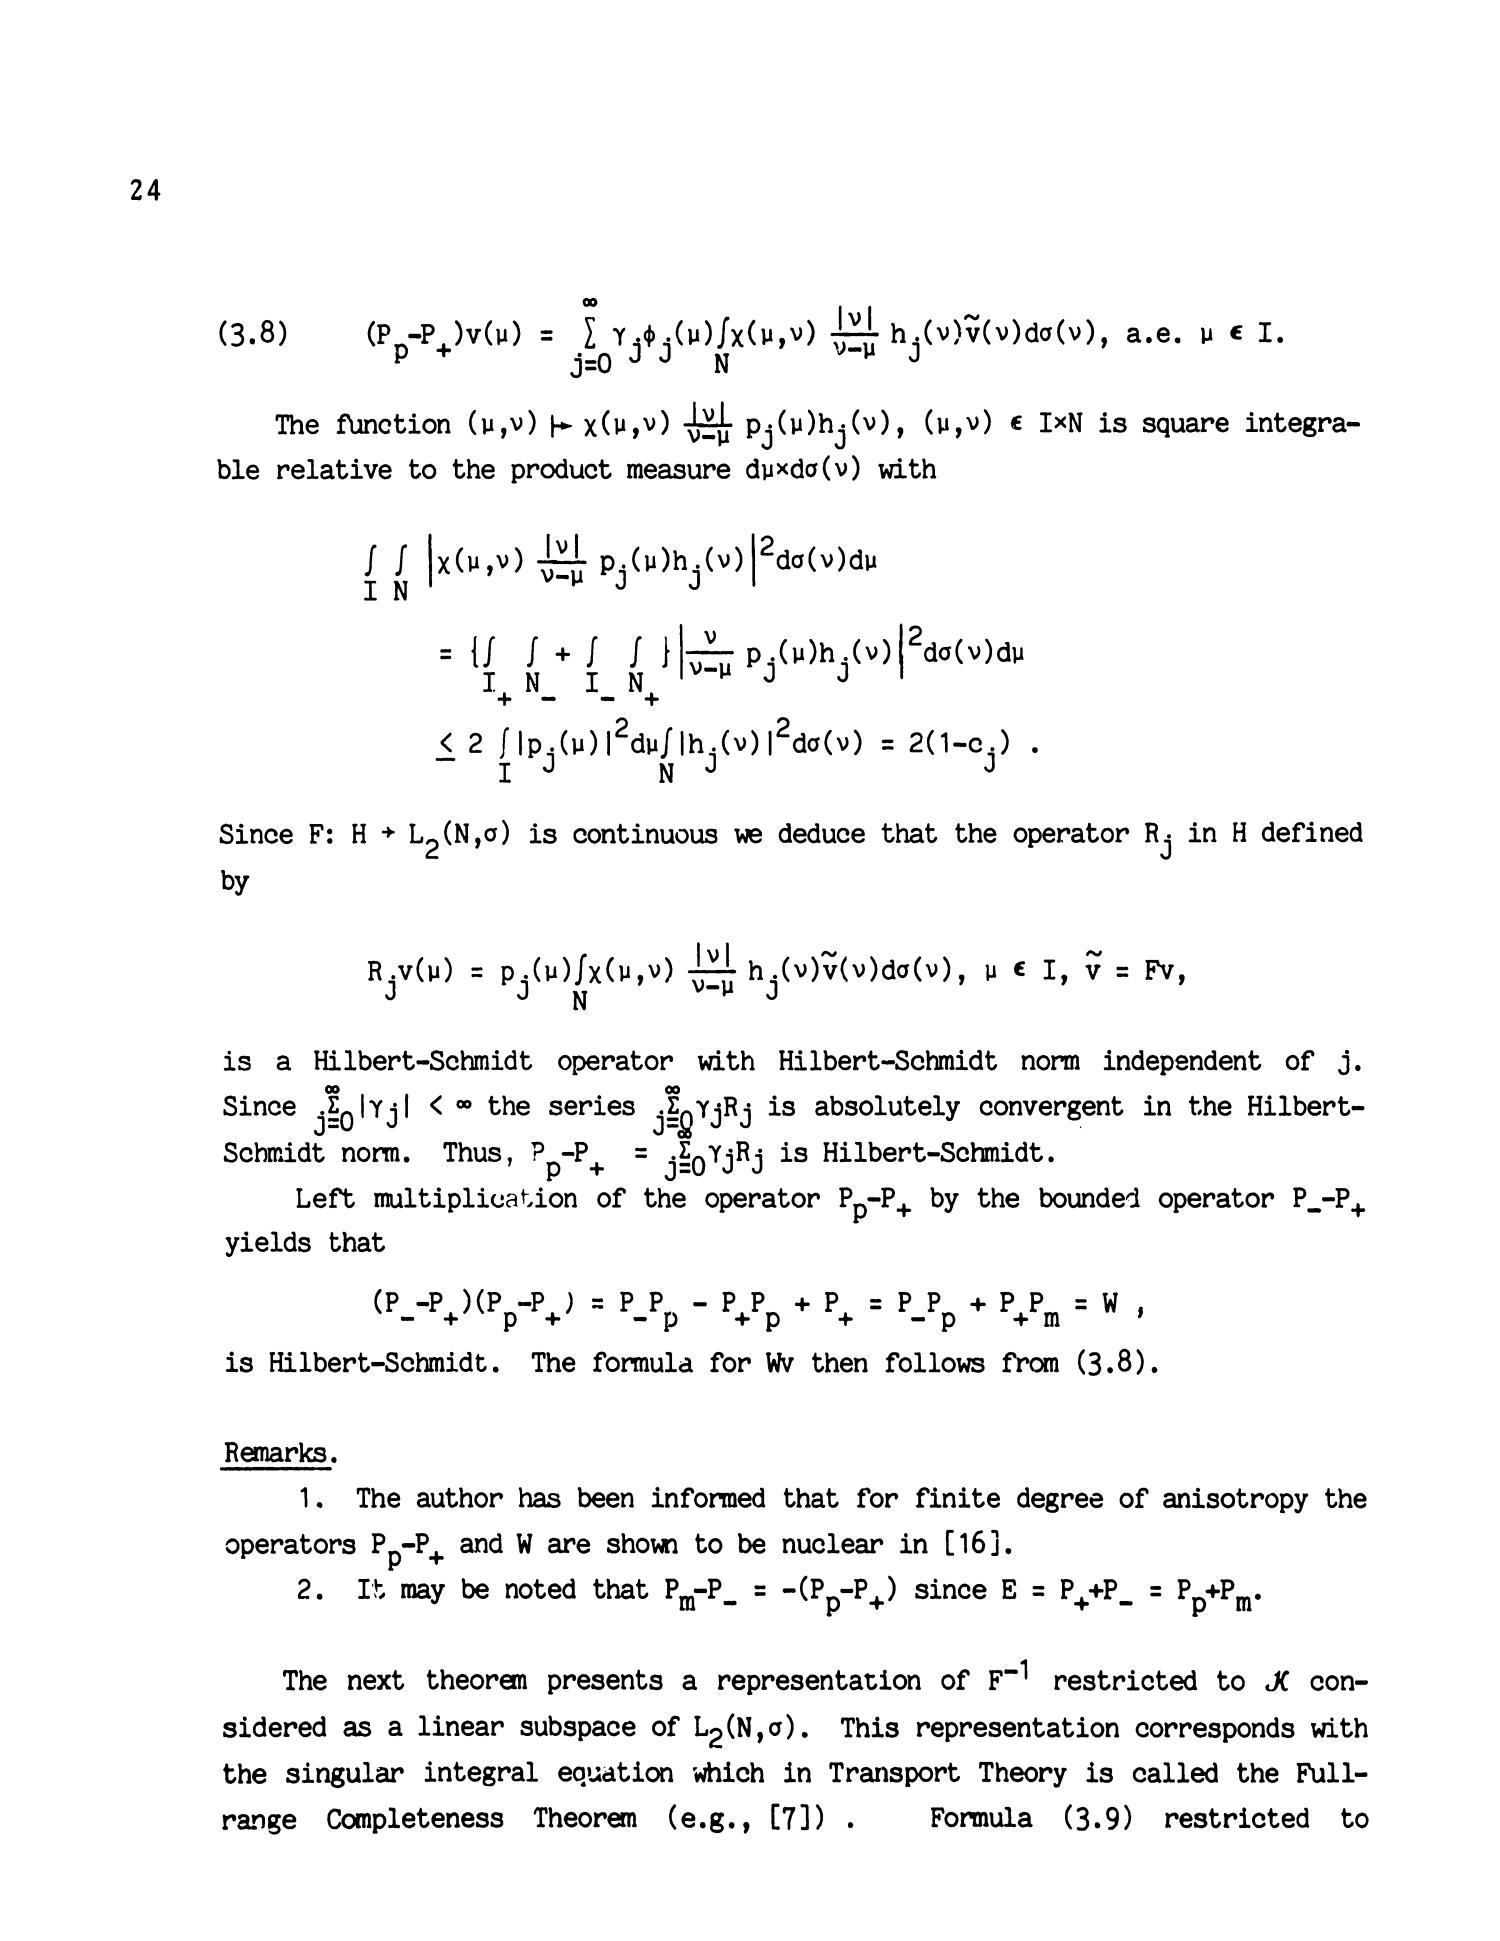 Time Independent One Speed Neutron Transport Equation With Anisotropic Scattering In Absorbing Media Page 24 Unt Digital Library